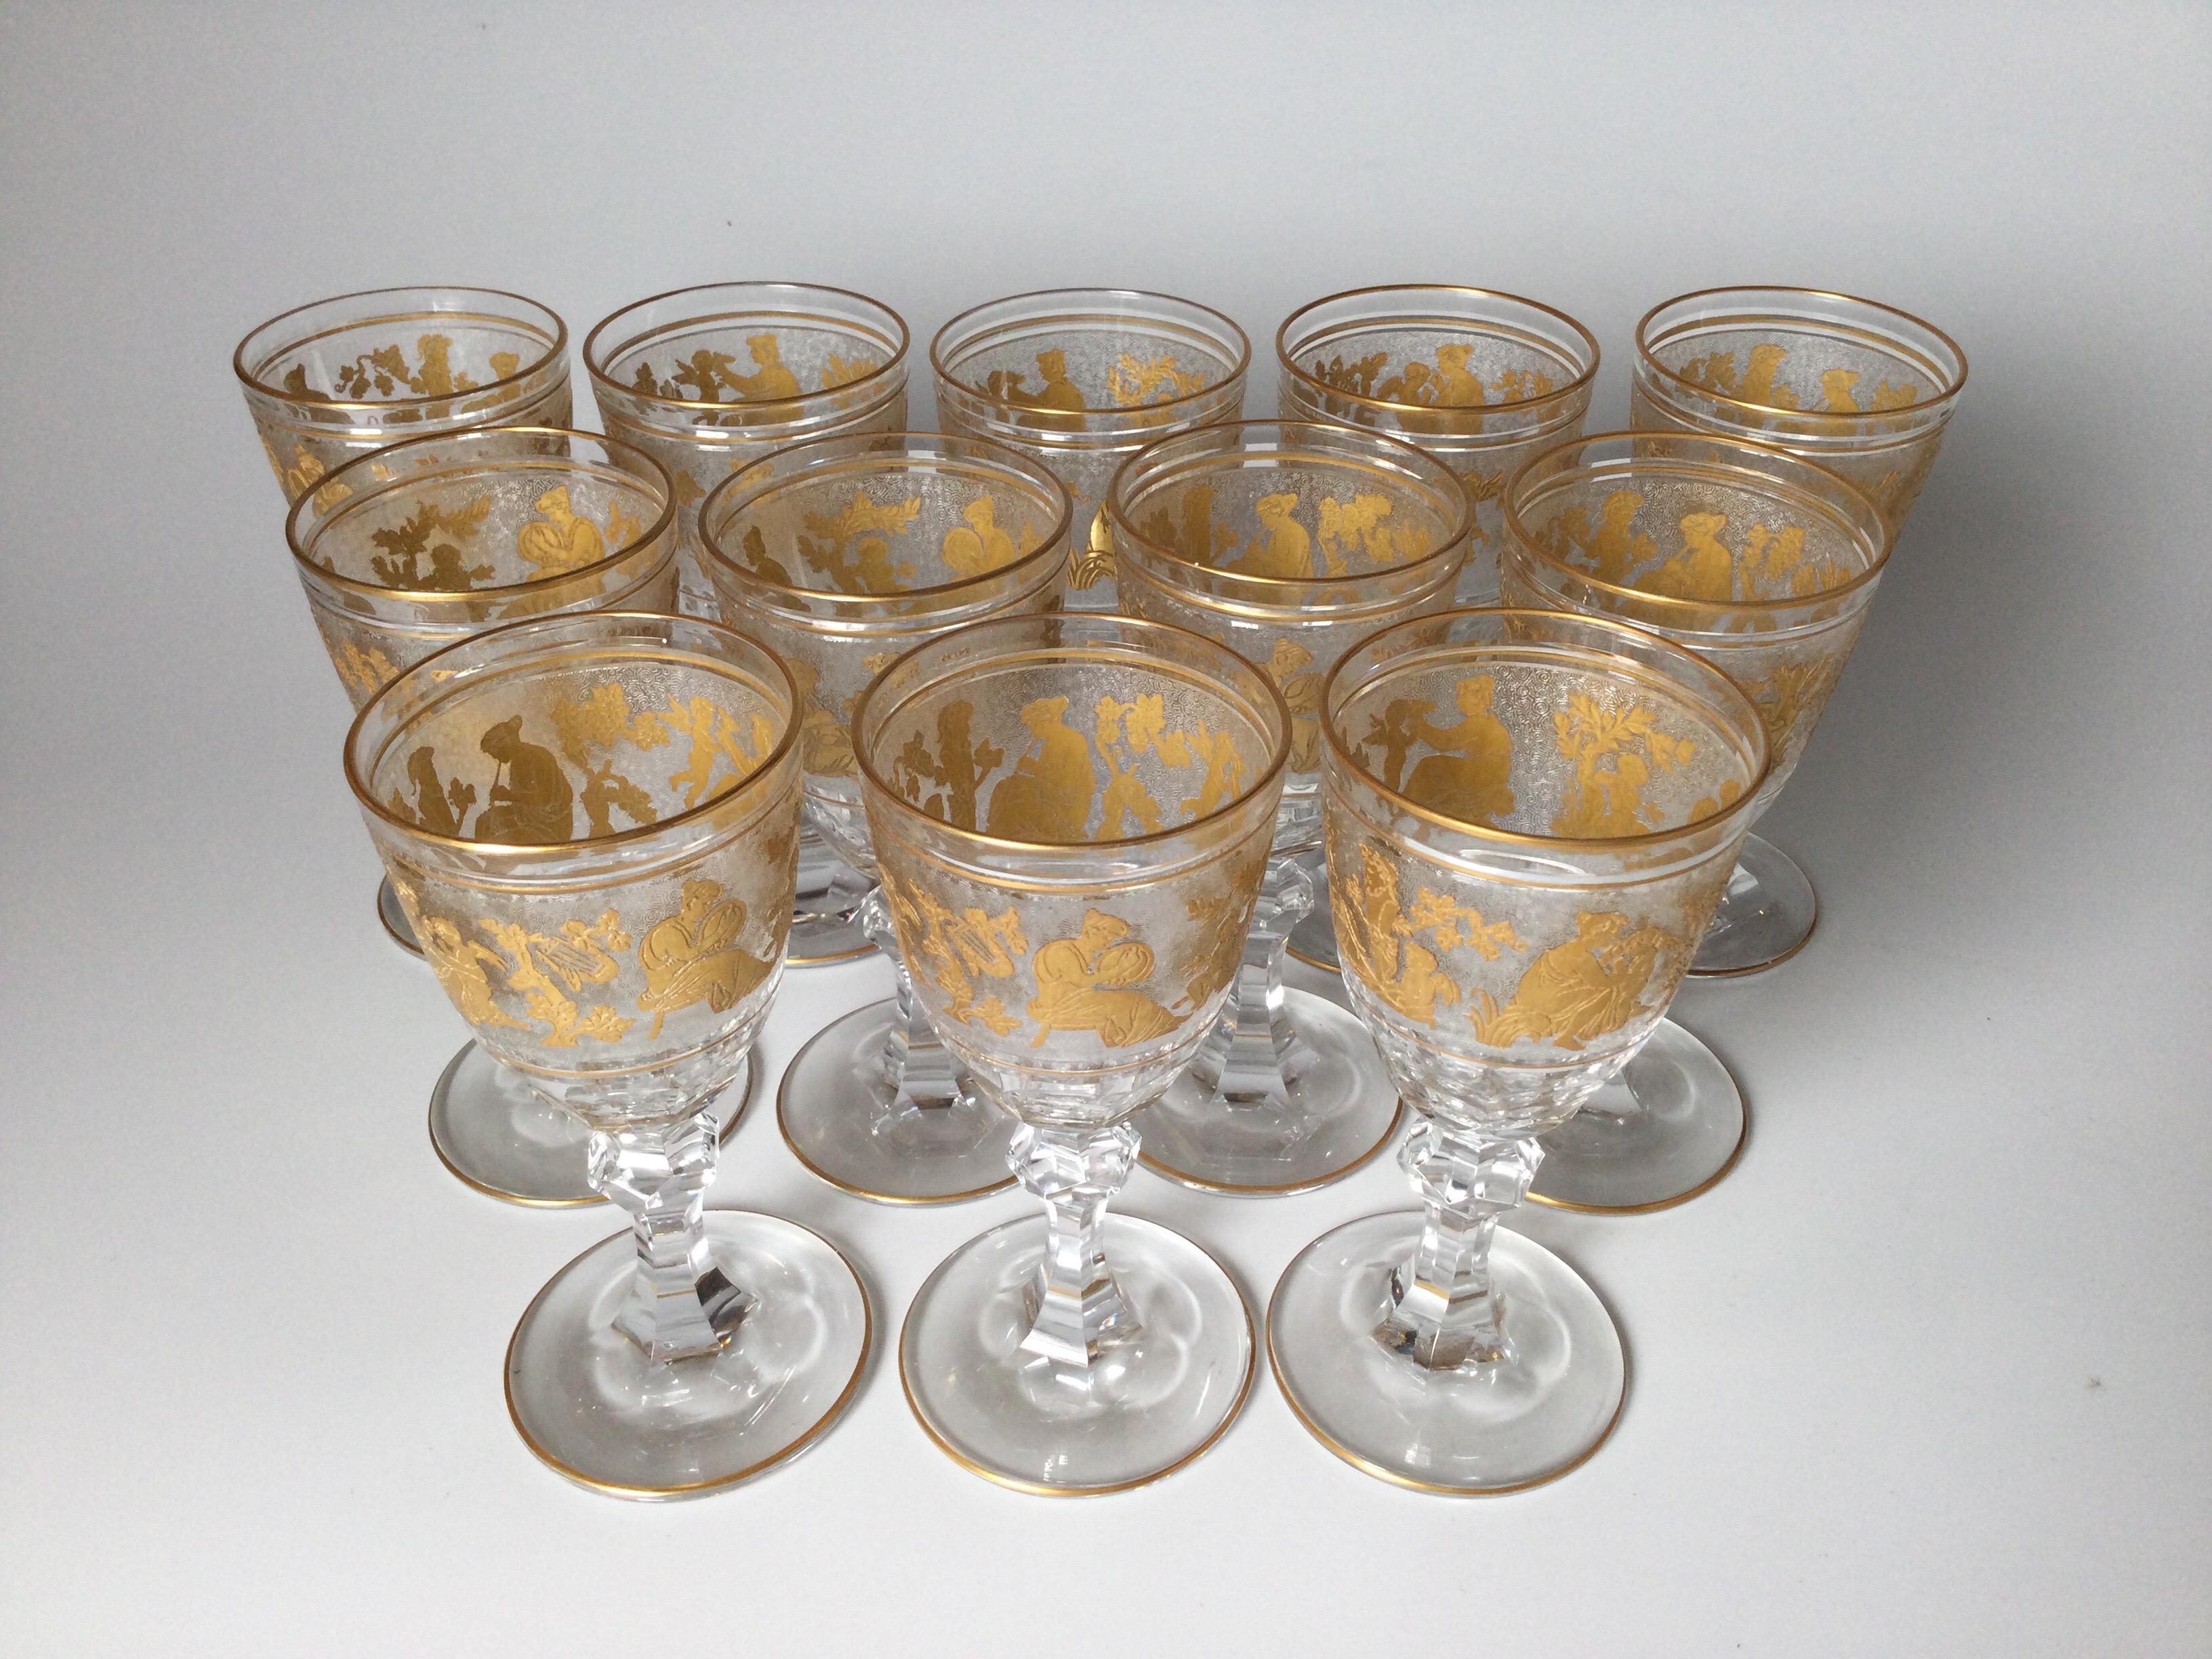 A magnificent set of 12 smaller wine or port goblets made by Val St. Lambert. Each one is handblown, panel cut bowl with cameo cut frieze of Roman figures embellished with gold leaf. This pattern is one of Val St. Lambert's finest and presents an